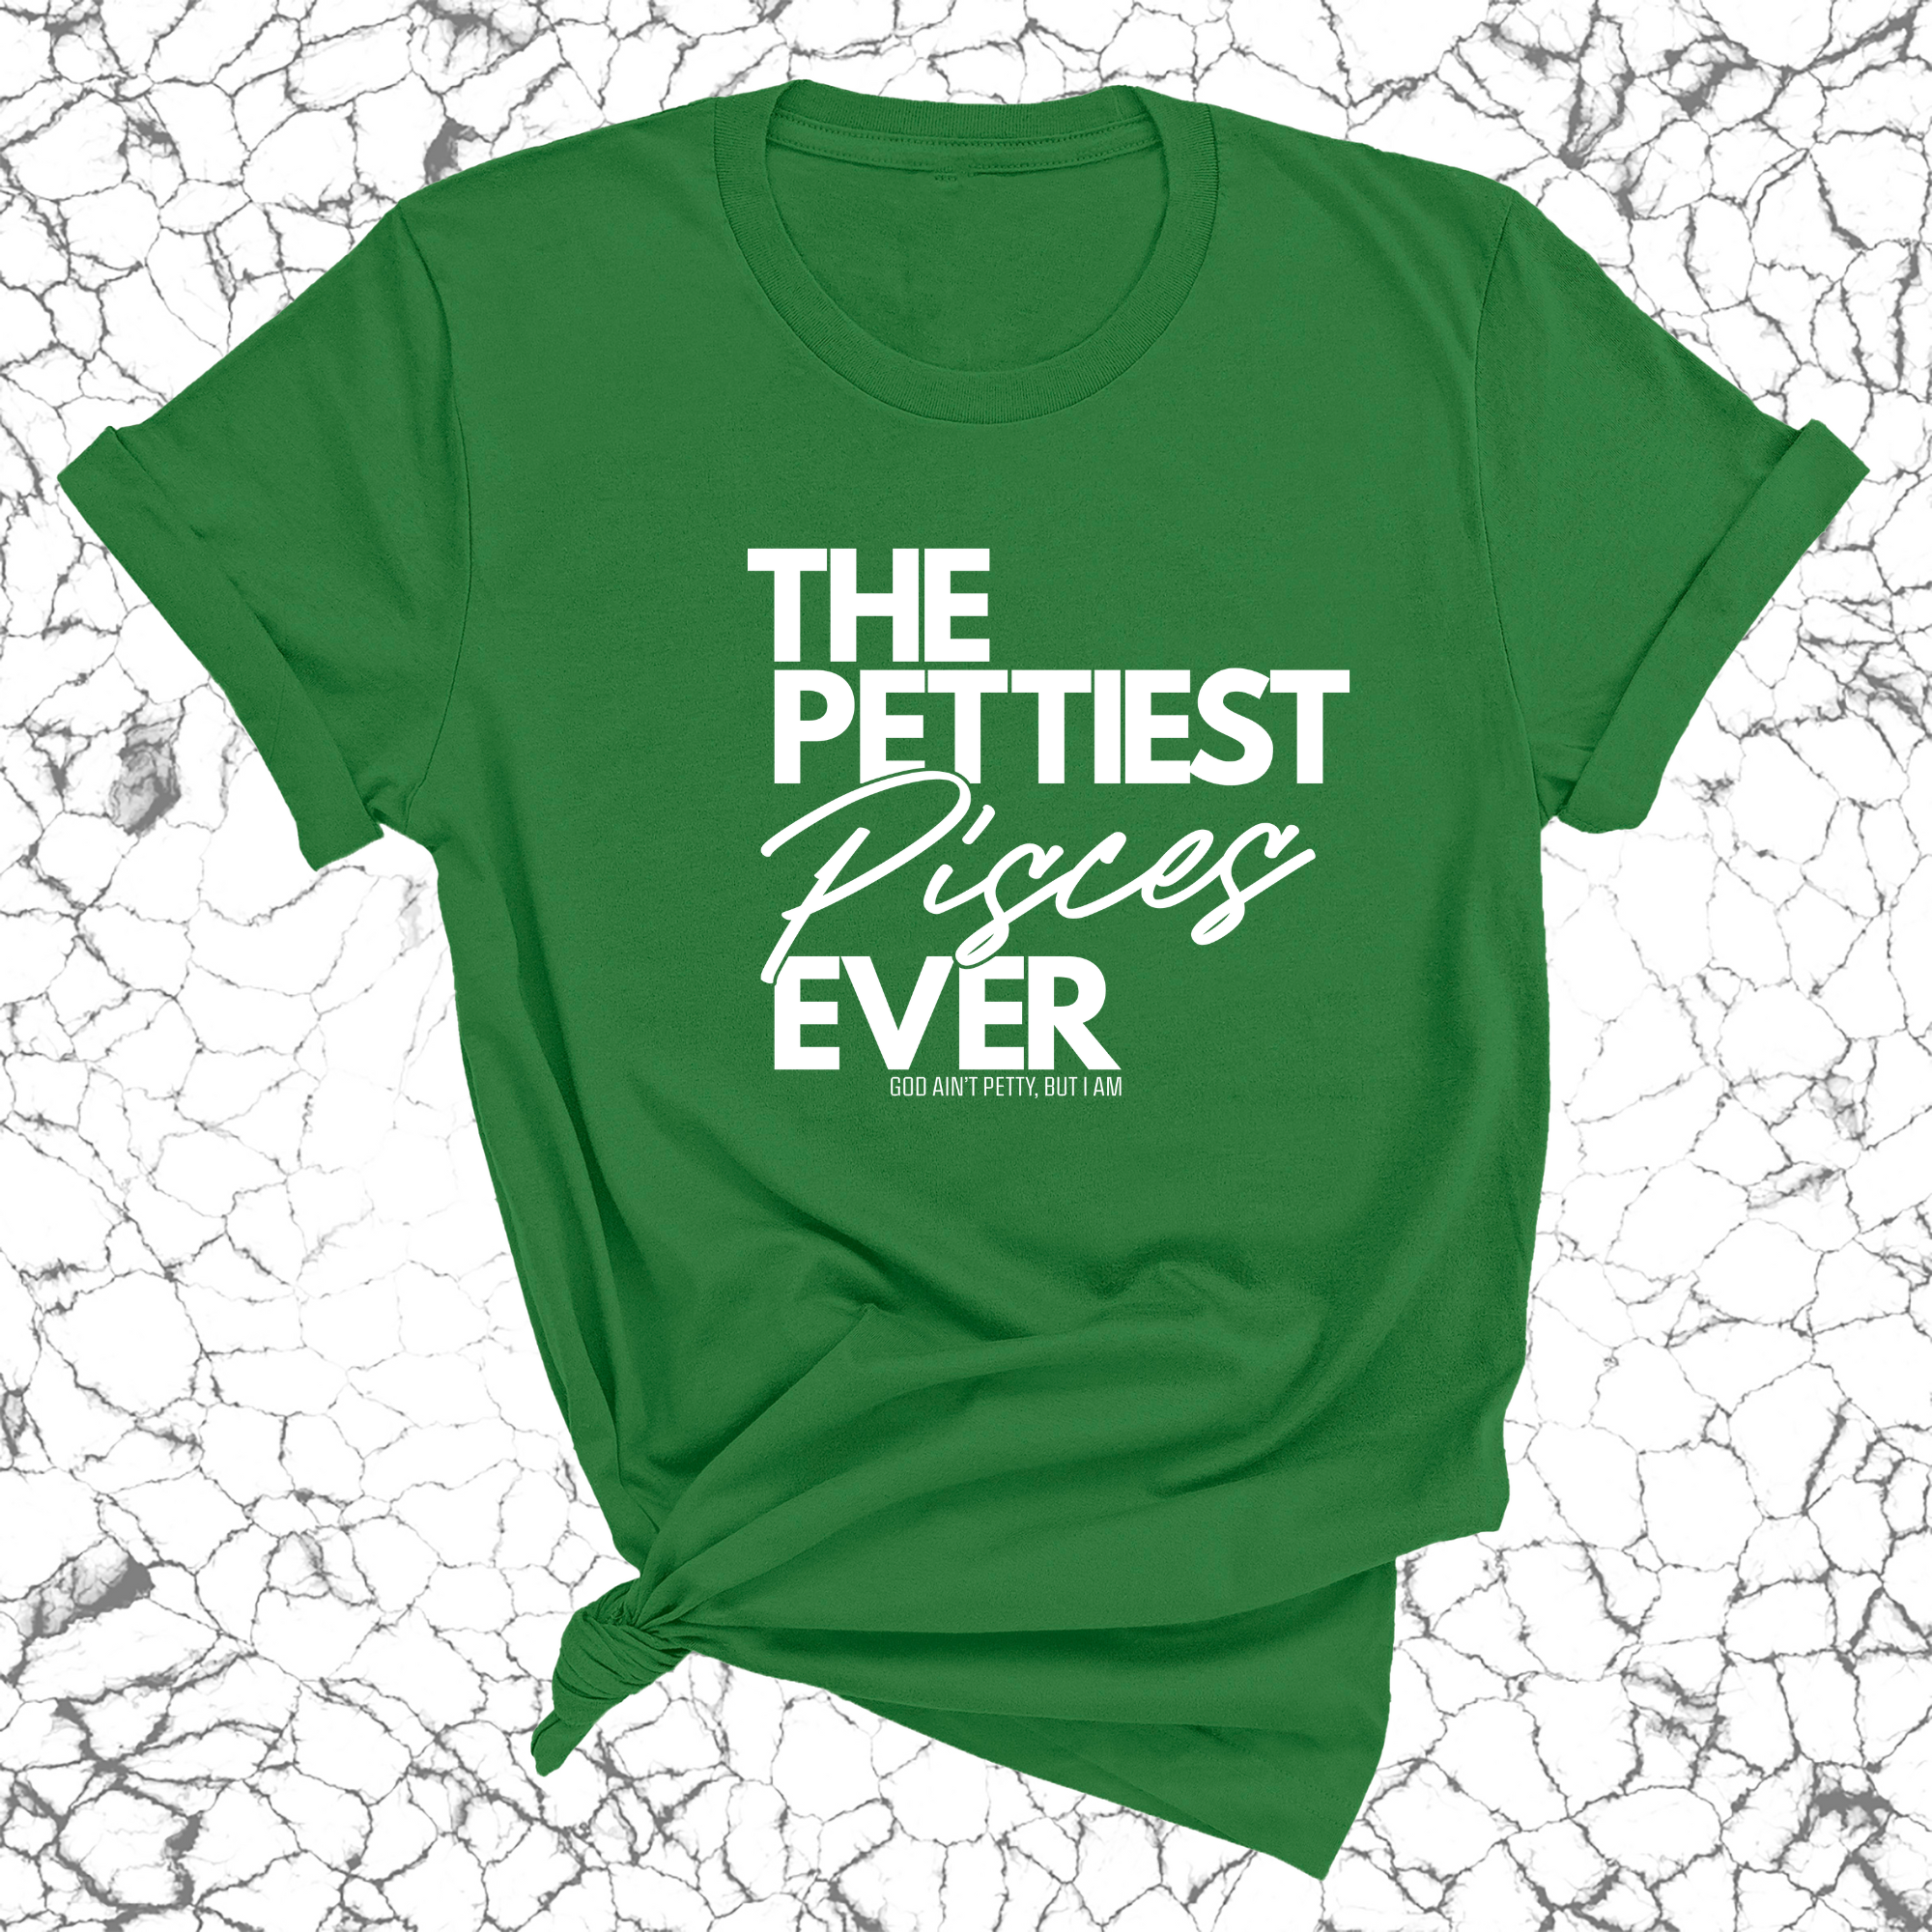 The Pettiest Pisces Ever Unisex Tee-T-Shirt-The Original God Ain't Petty But I Am